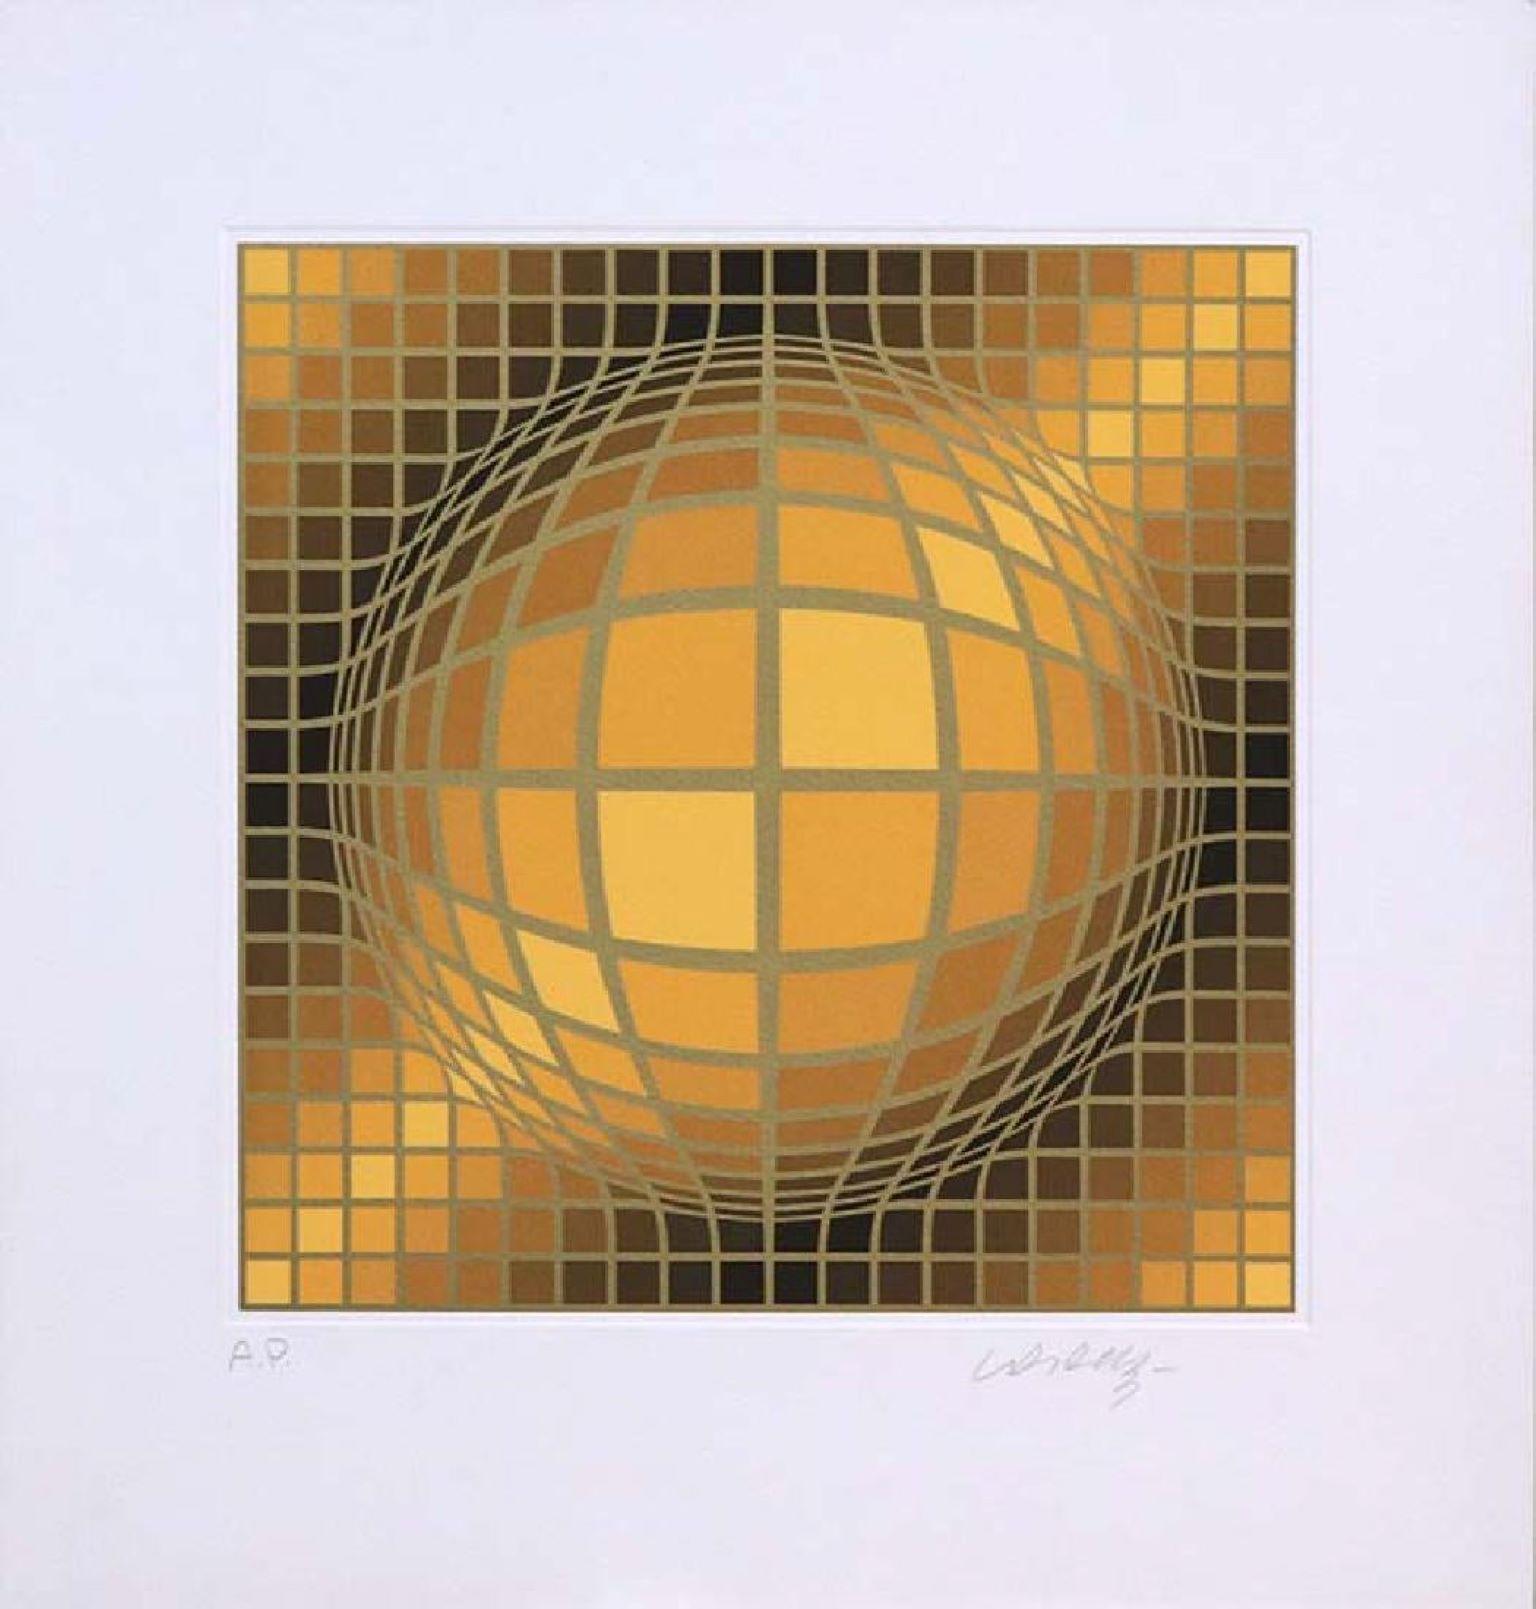 "Biga II" from 1991 is a Limited Edition Serigraph, AP that is pencil-signed by the artist. The print features a Circle Fine Art Stamp (please see photo) and Accession Number: VVB 329. It is in Very Good Condition. 

Victor Vasarely (1906-1997) was